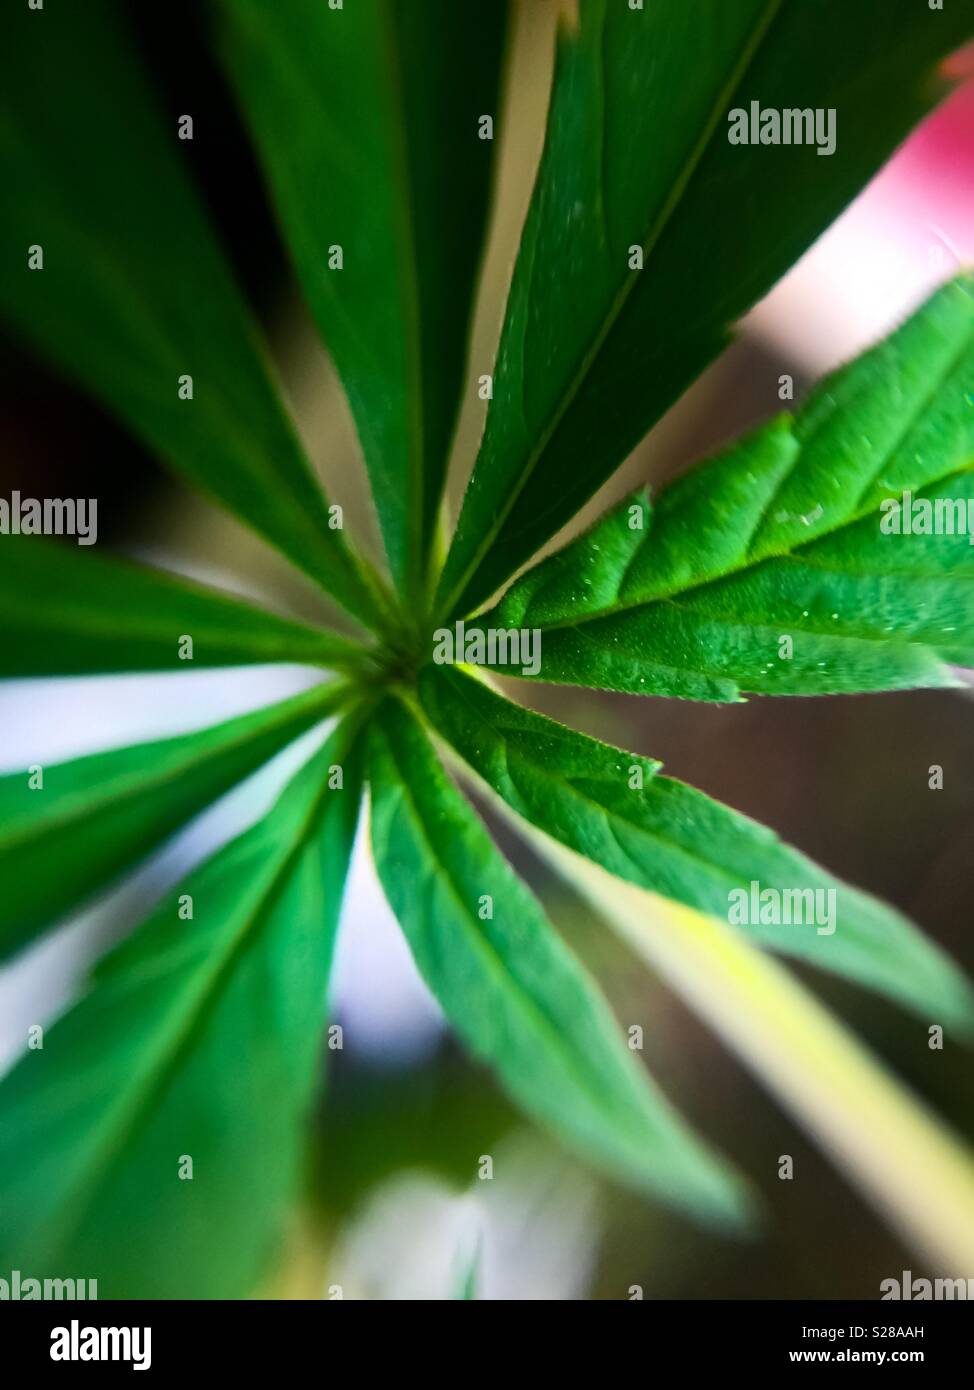 https://c8.alamy.com/comp/S28AAH/a-mature-marijuana-leaf-close-up-plant-leaf-macro-up-close-green-the-real-thing-fresh-grown-nature-miracle-weed-legalization-decriminalization-legalize-decriminalize-sativa-pot-S28AAH.jpg